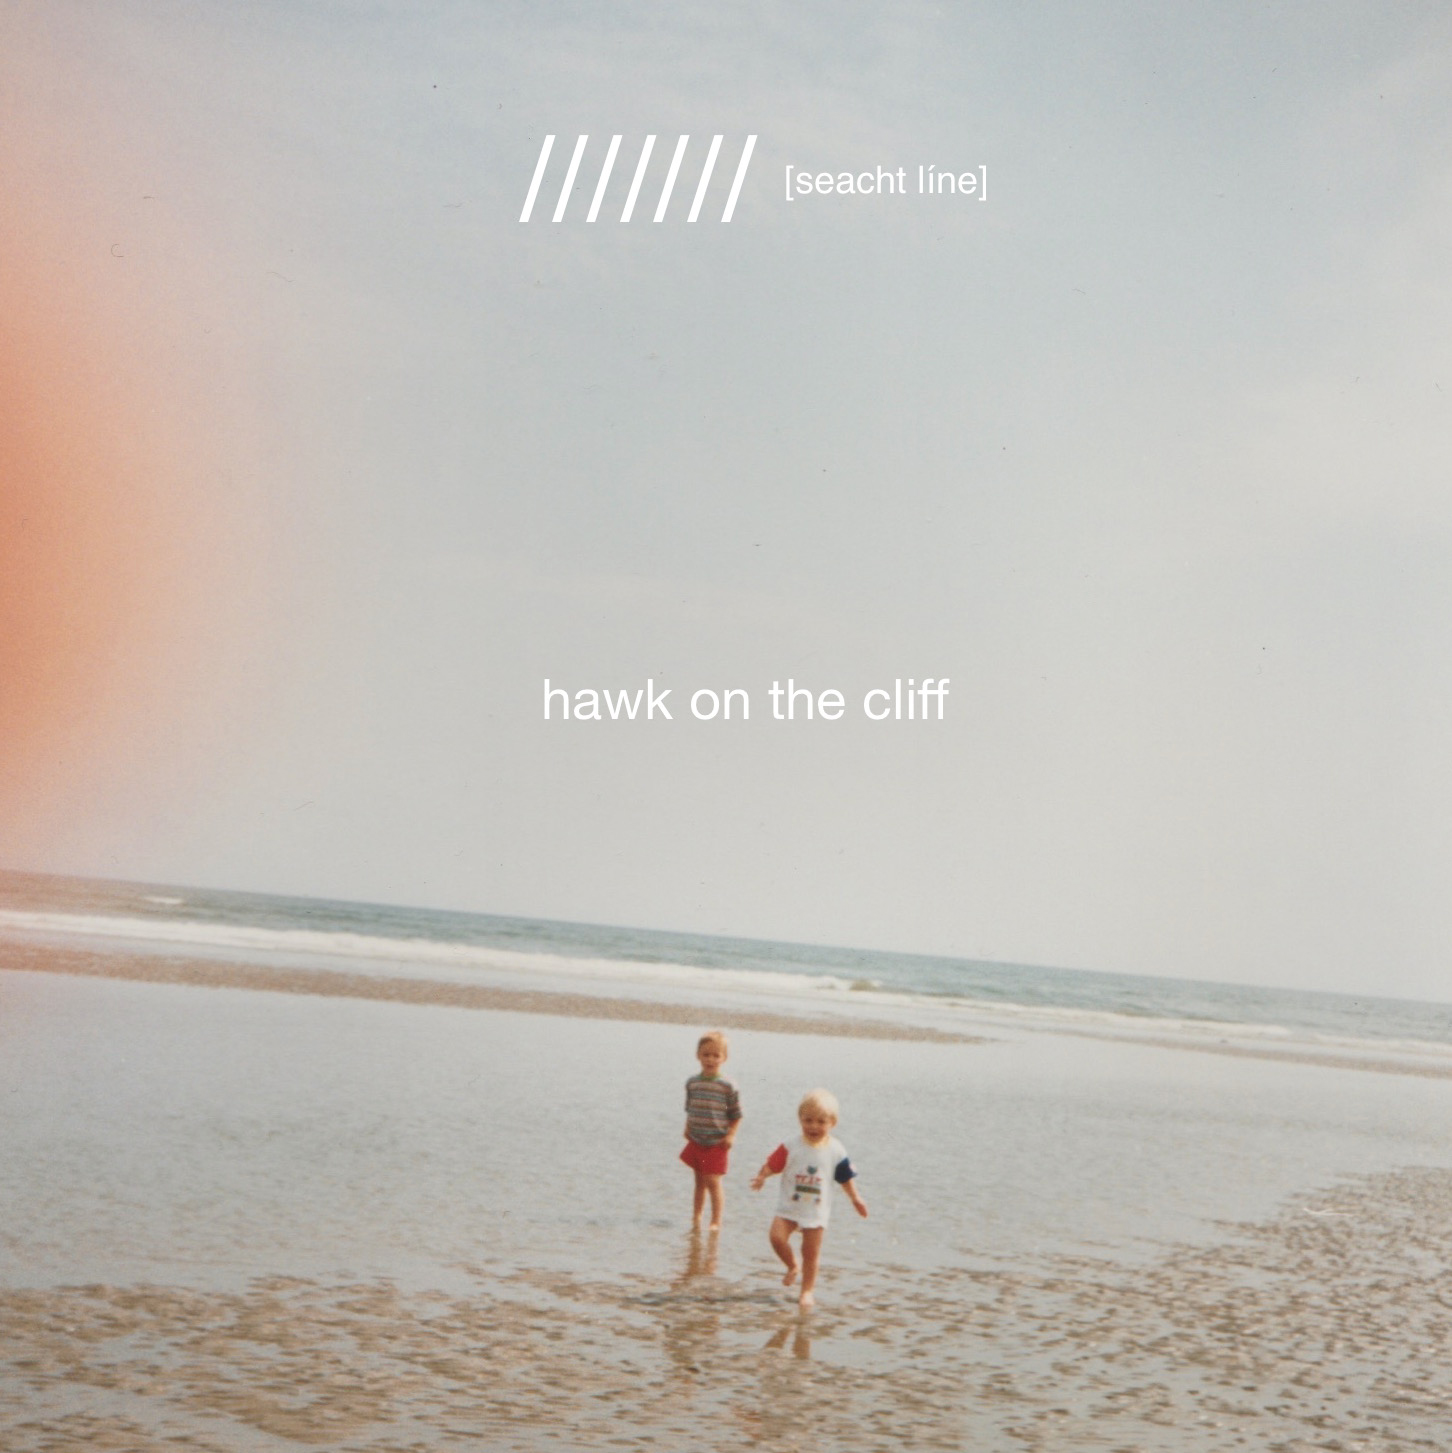 Listen to 'Hawk On The Cliff' from Joshua & Connor Burnside's new project /////// [seacht líne] 